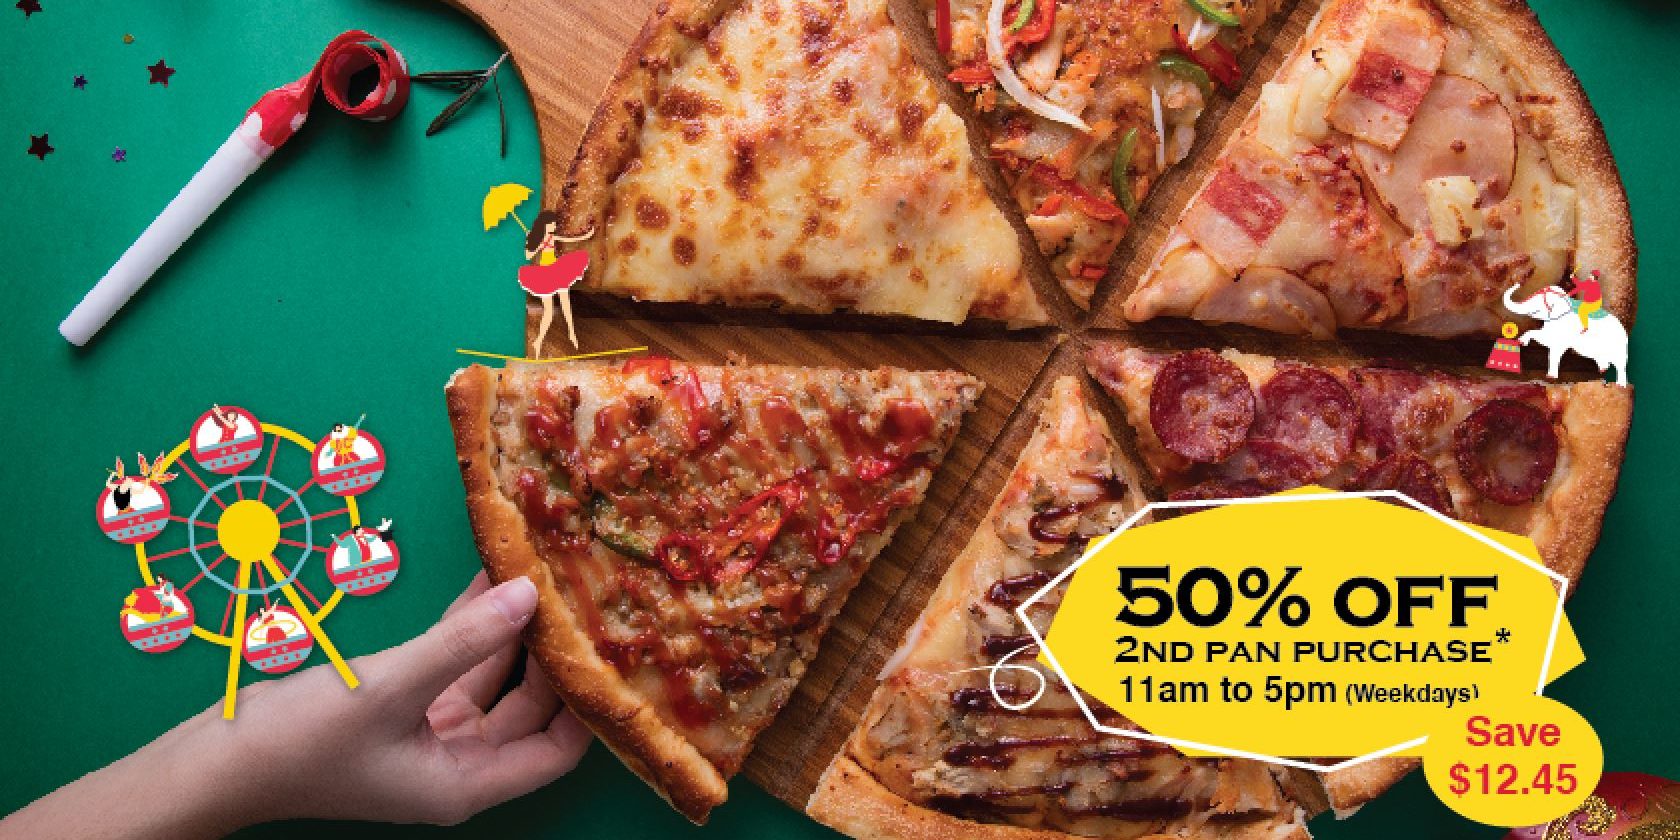 Pezzo Pizza Singapore 50% Off 2nd Pan Purchase Promotion ends 31 Oct 2016